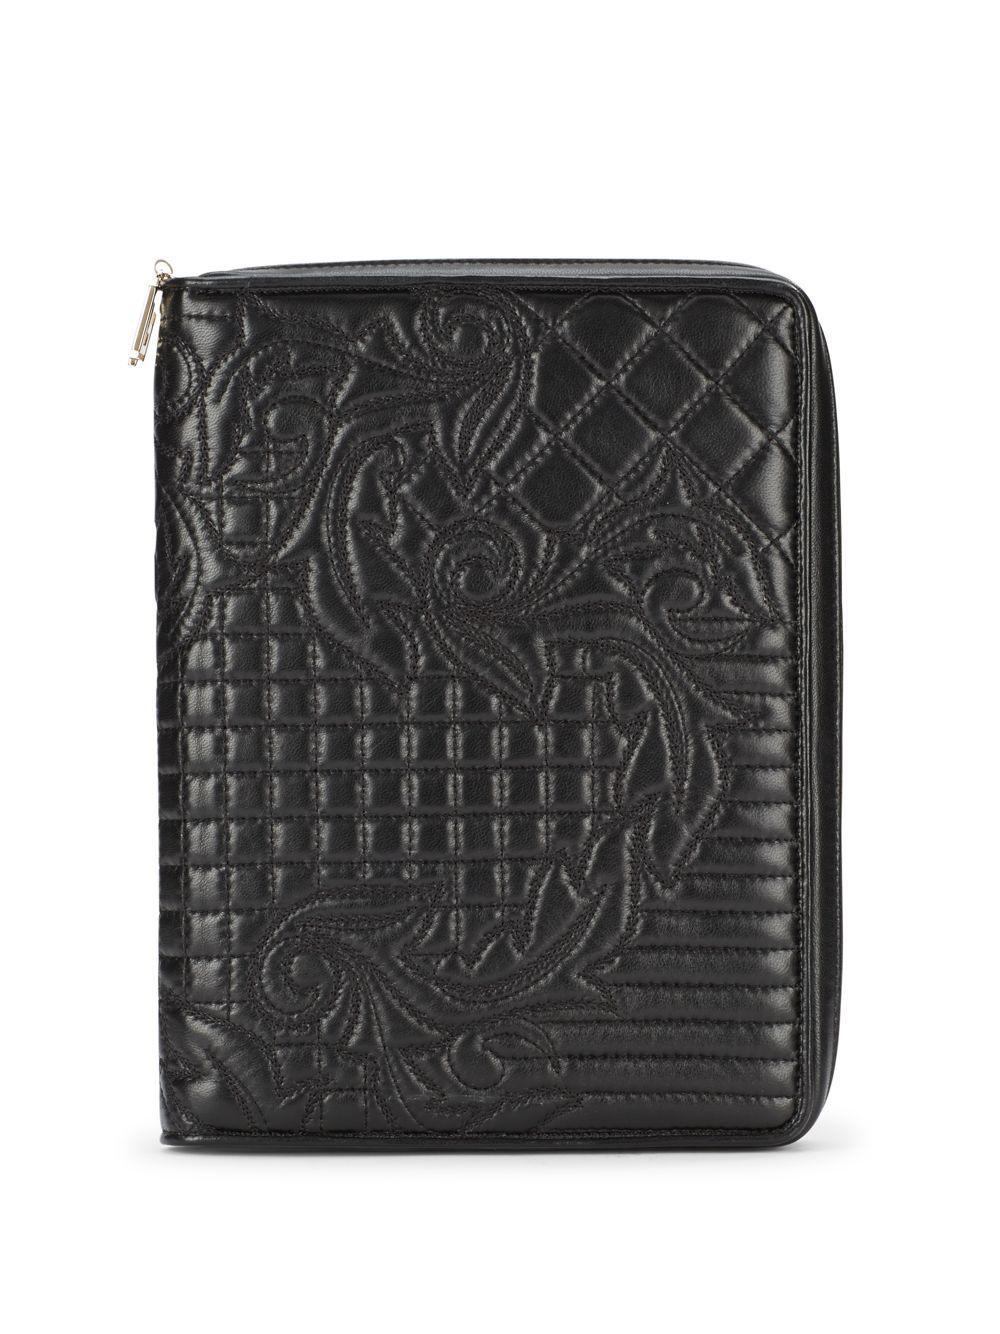 Versace Leather Laptop Case in Black - Lyst